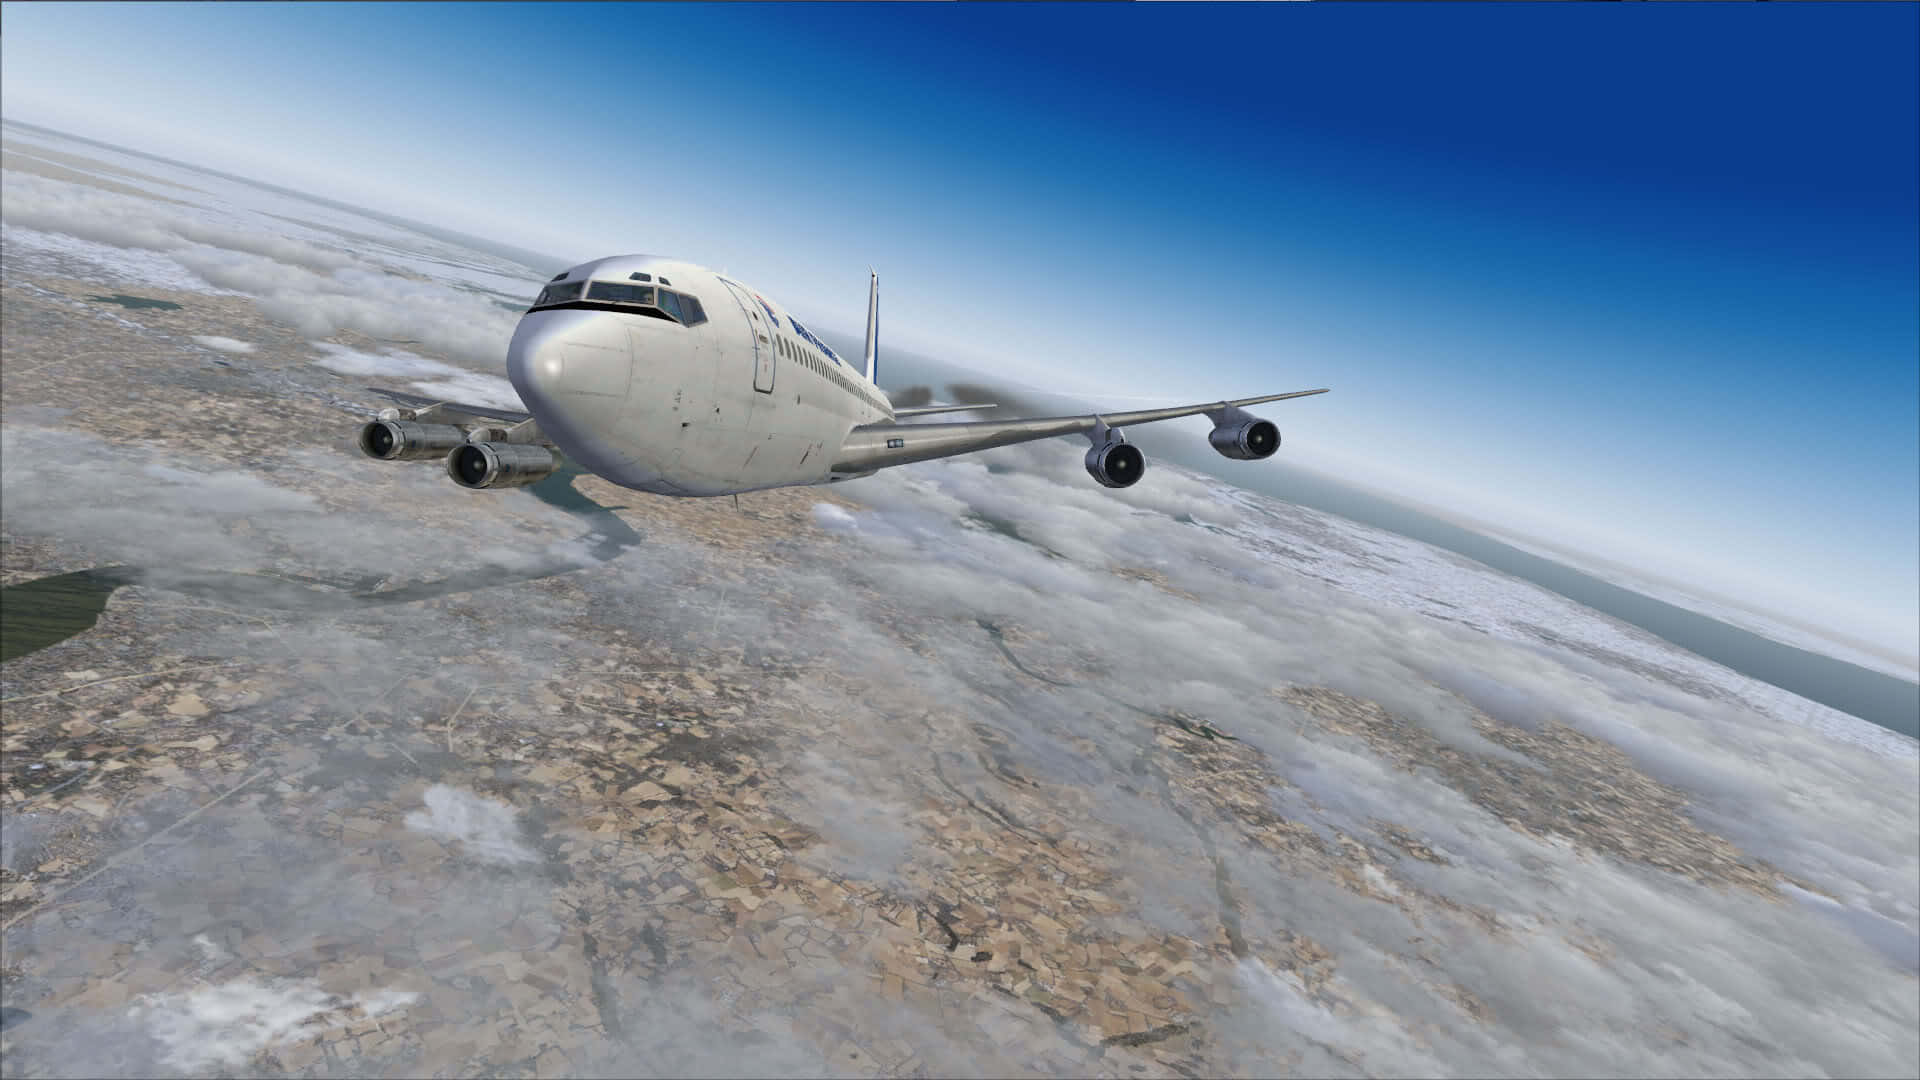 Experience the Most Realistic Flight Simulation with Microsoft Flight Simulator